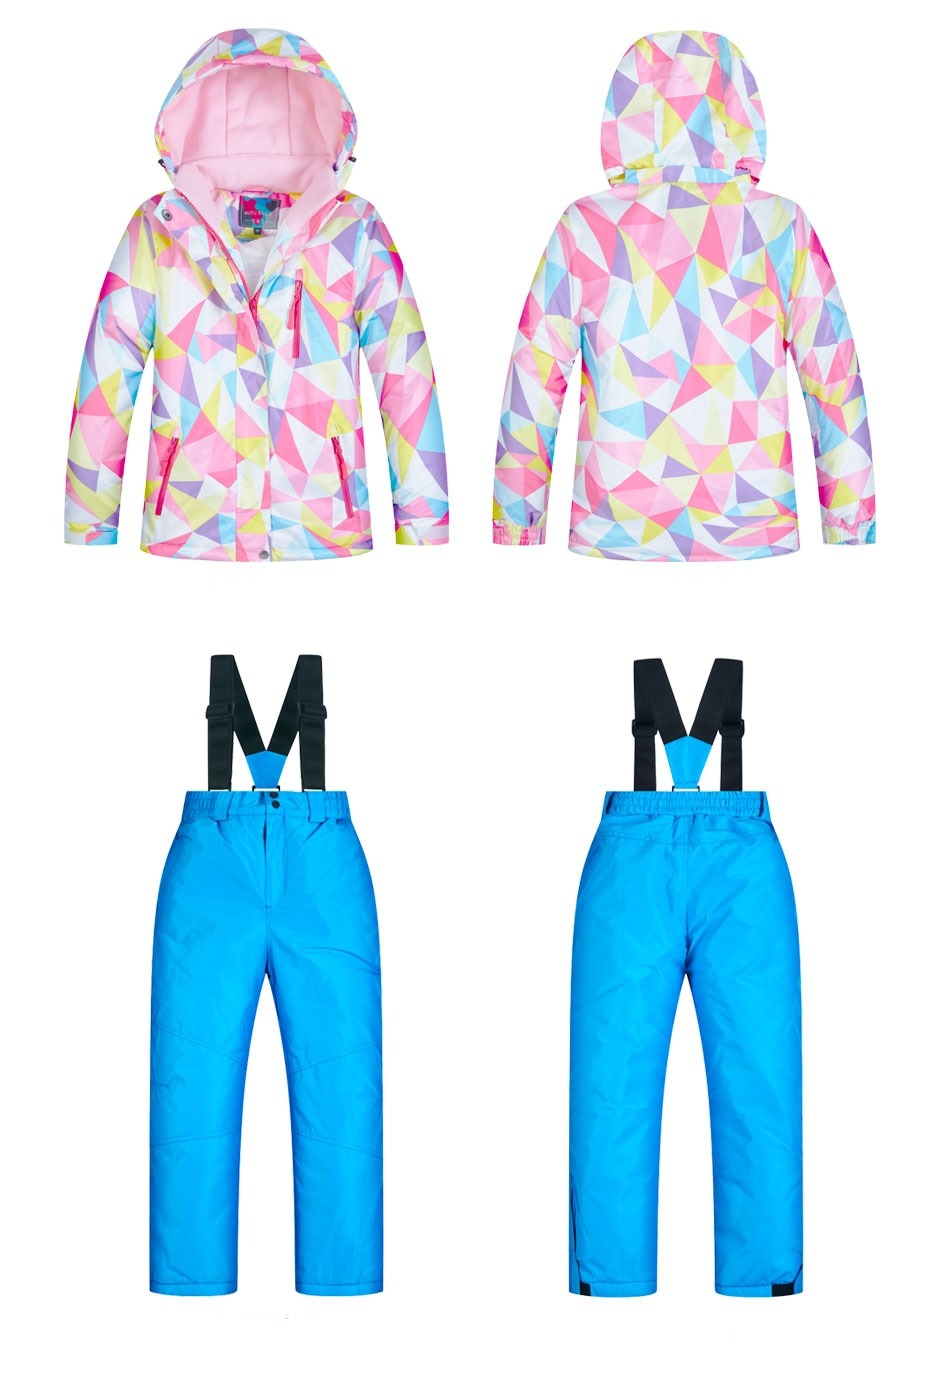 front and back view of ski jacket and pants set